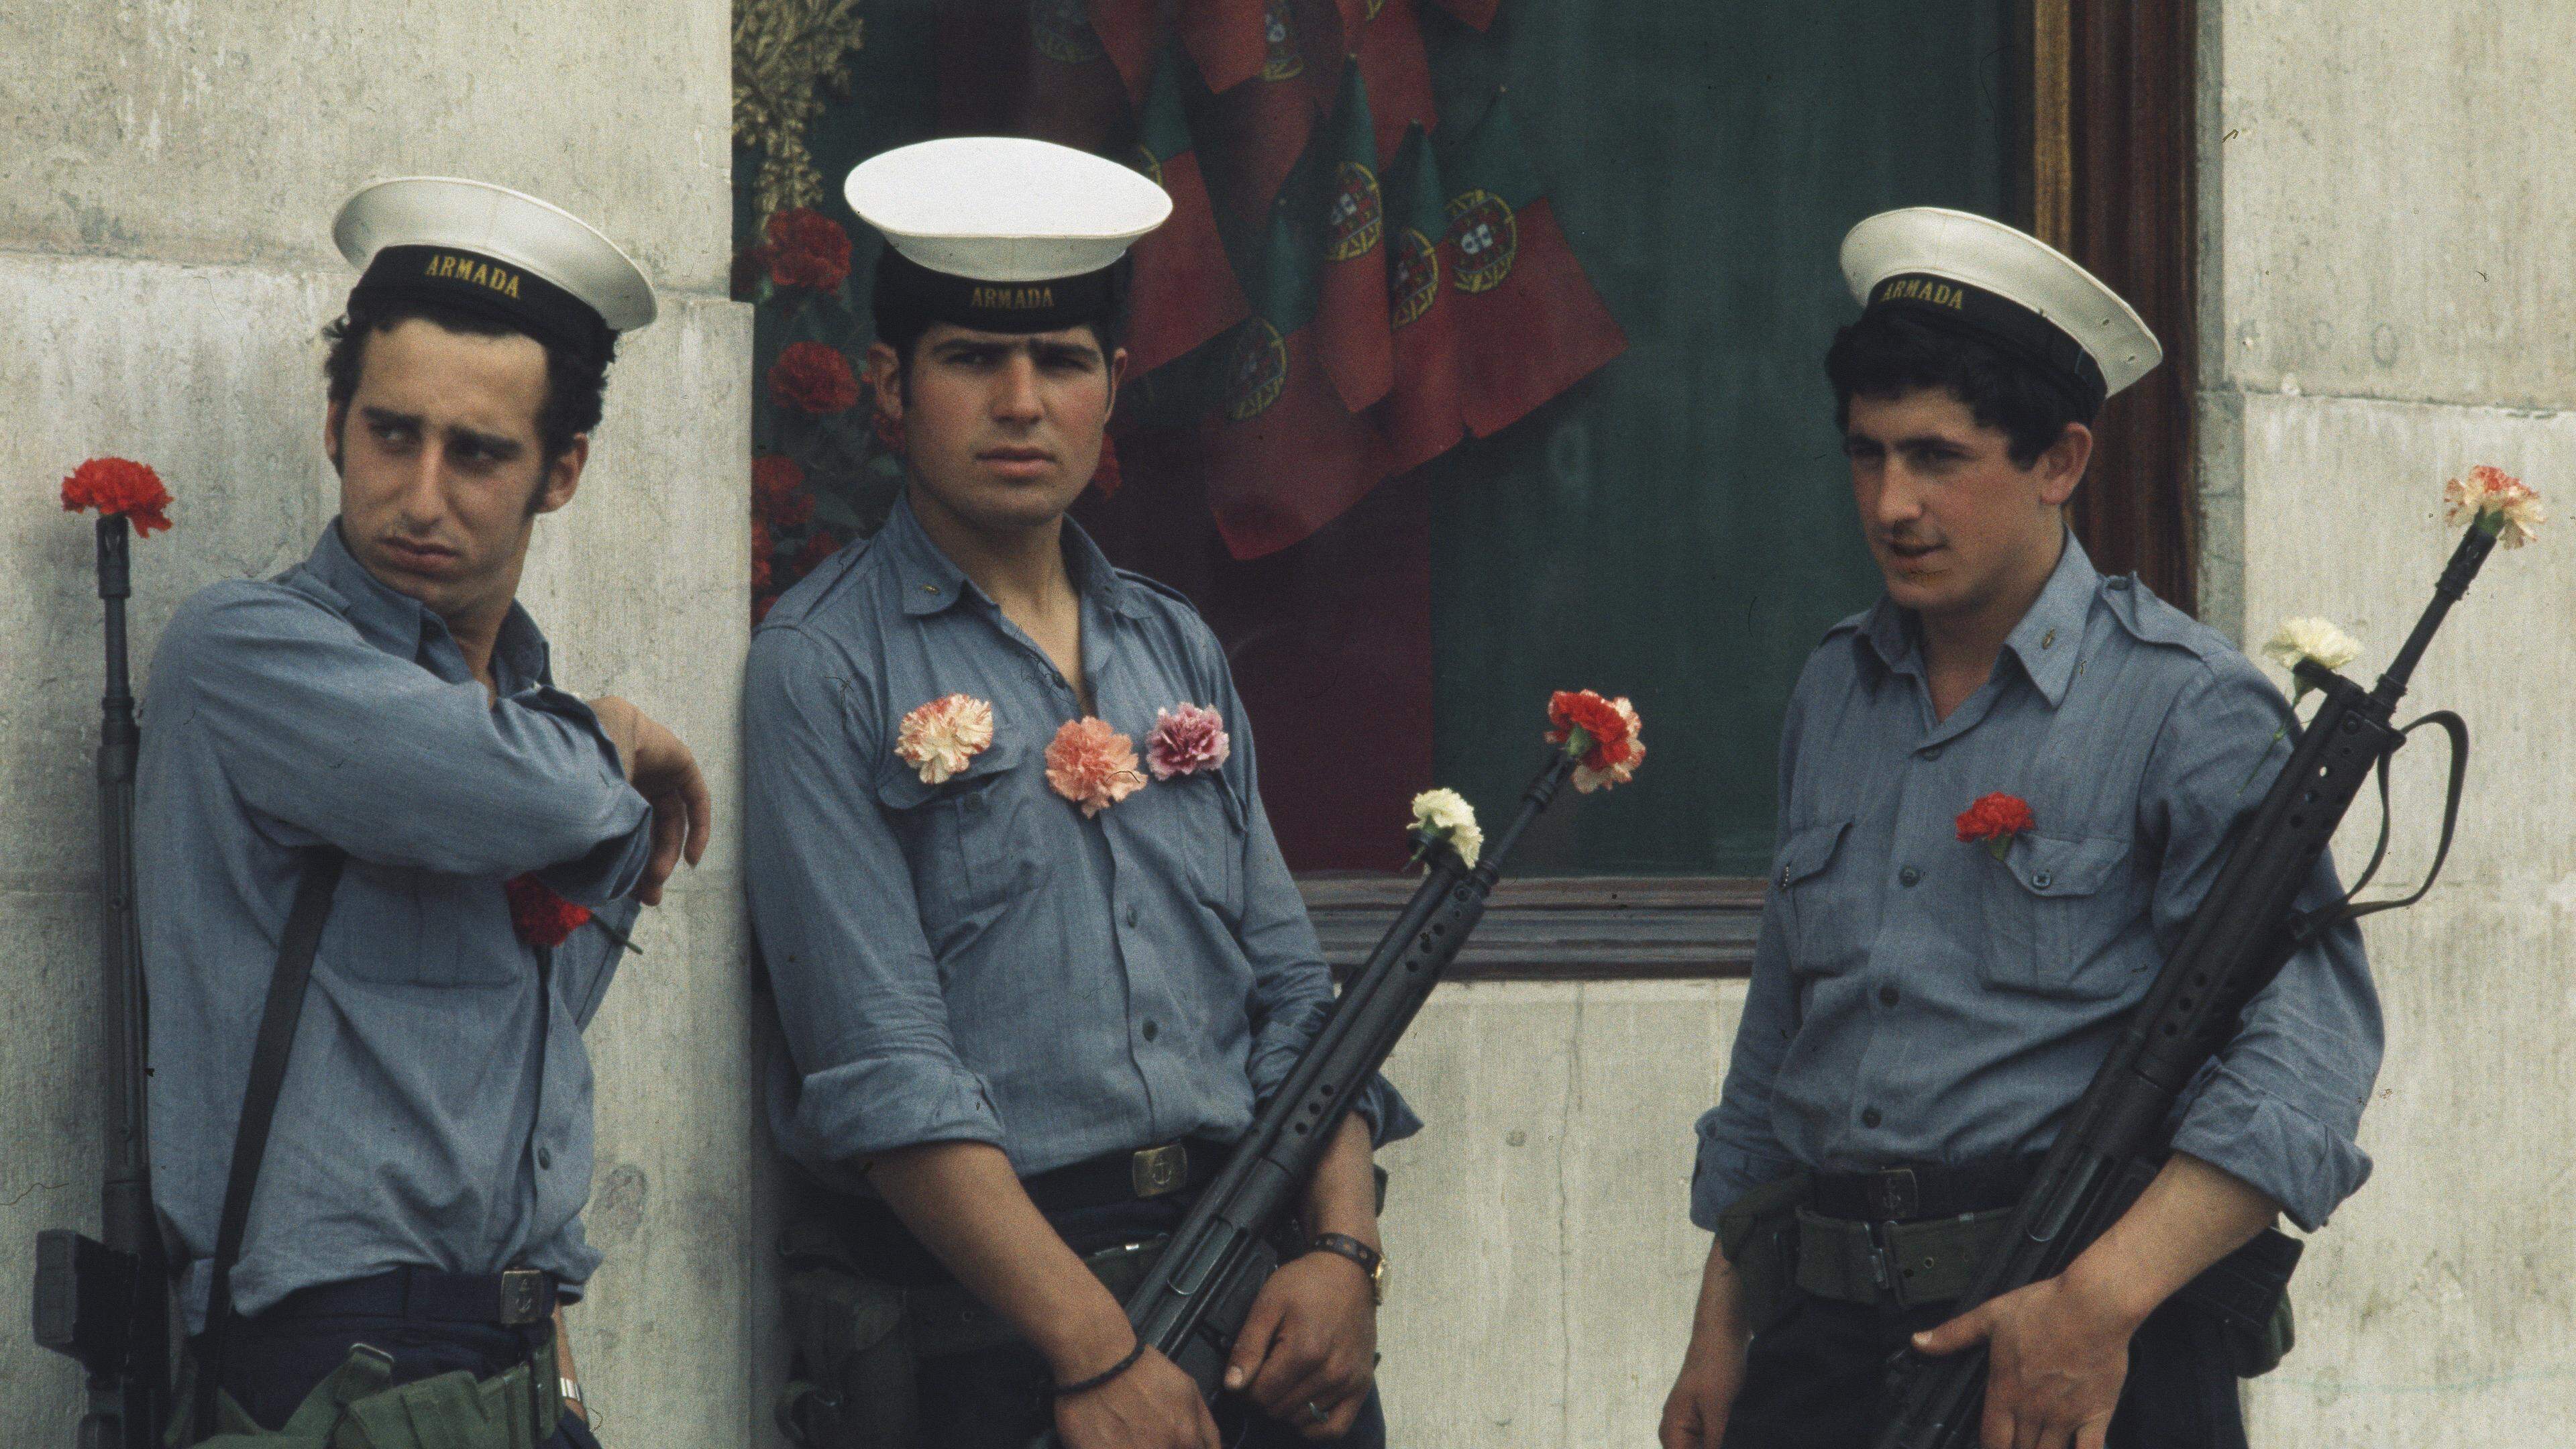 Portuguese soldiers with carnations on their uniforms and in their gun barrels stand guard in Lisbon on April 29th, 1974. The carnation is a symbol of the 'Carnation Revolution' military coup that ended nearly 50 years of dictatorship in Portugal. (Photo by UPI/Bettmann Archive/Getty Images)